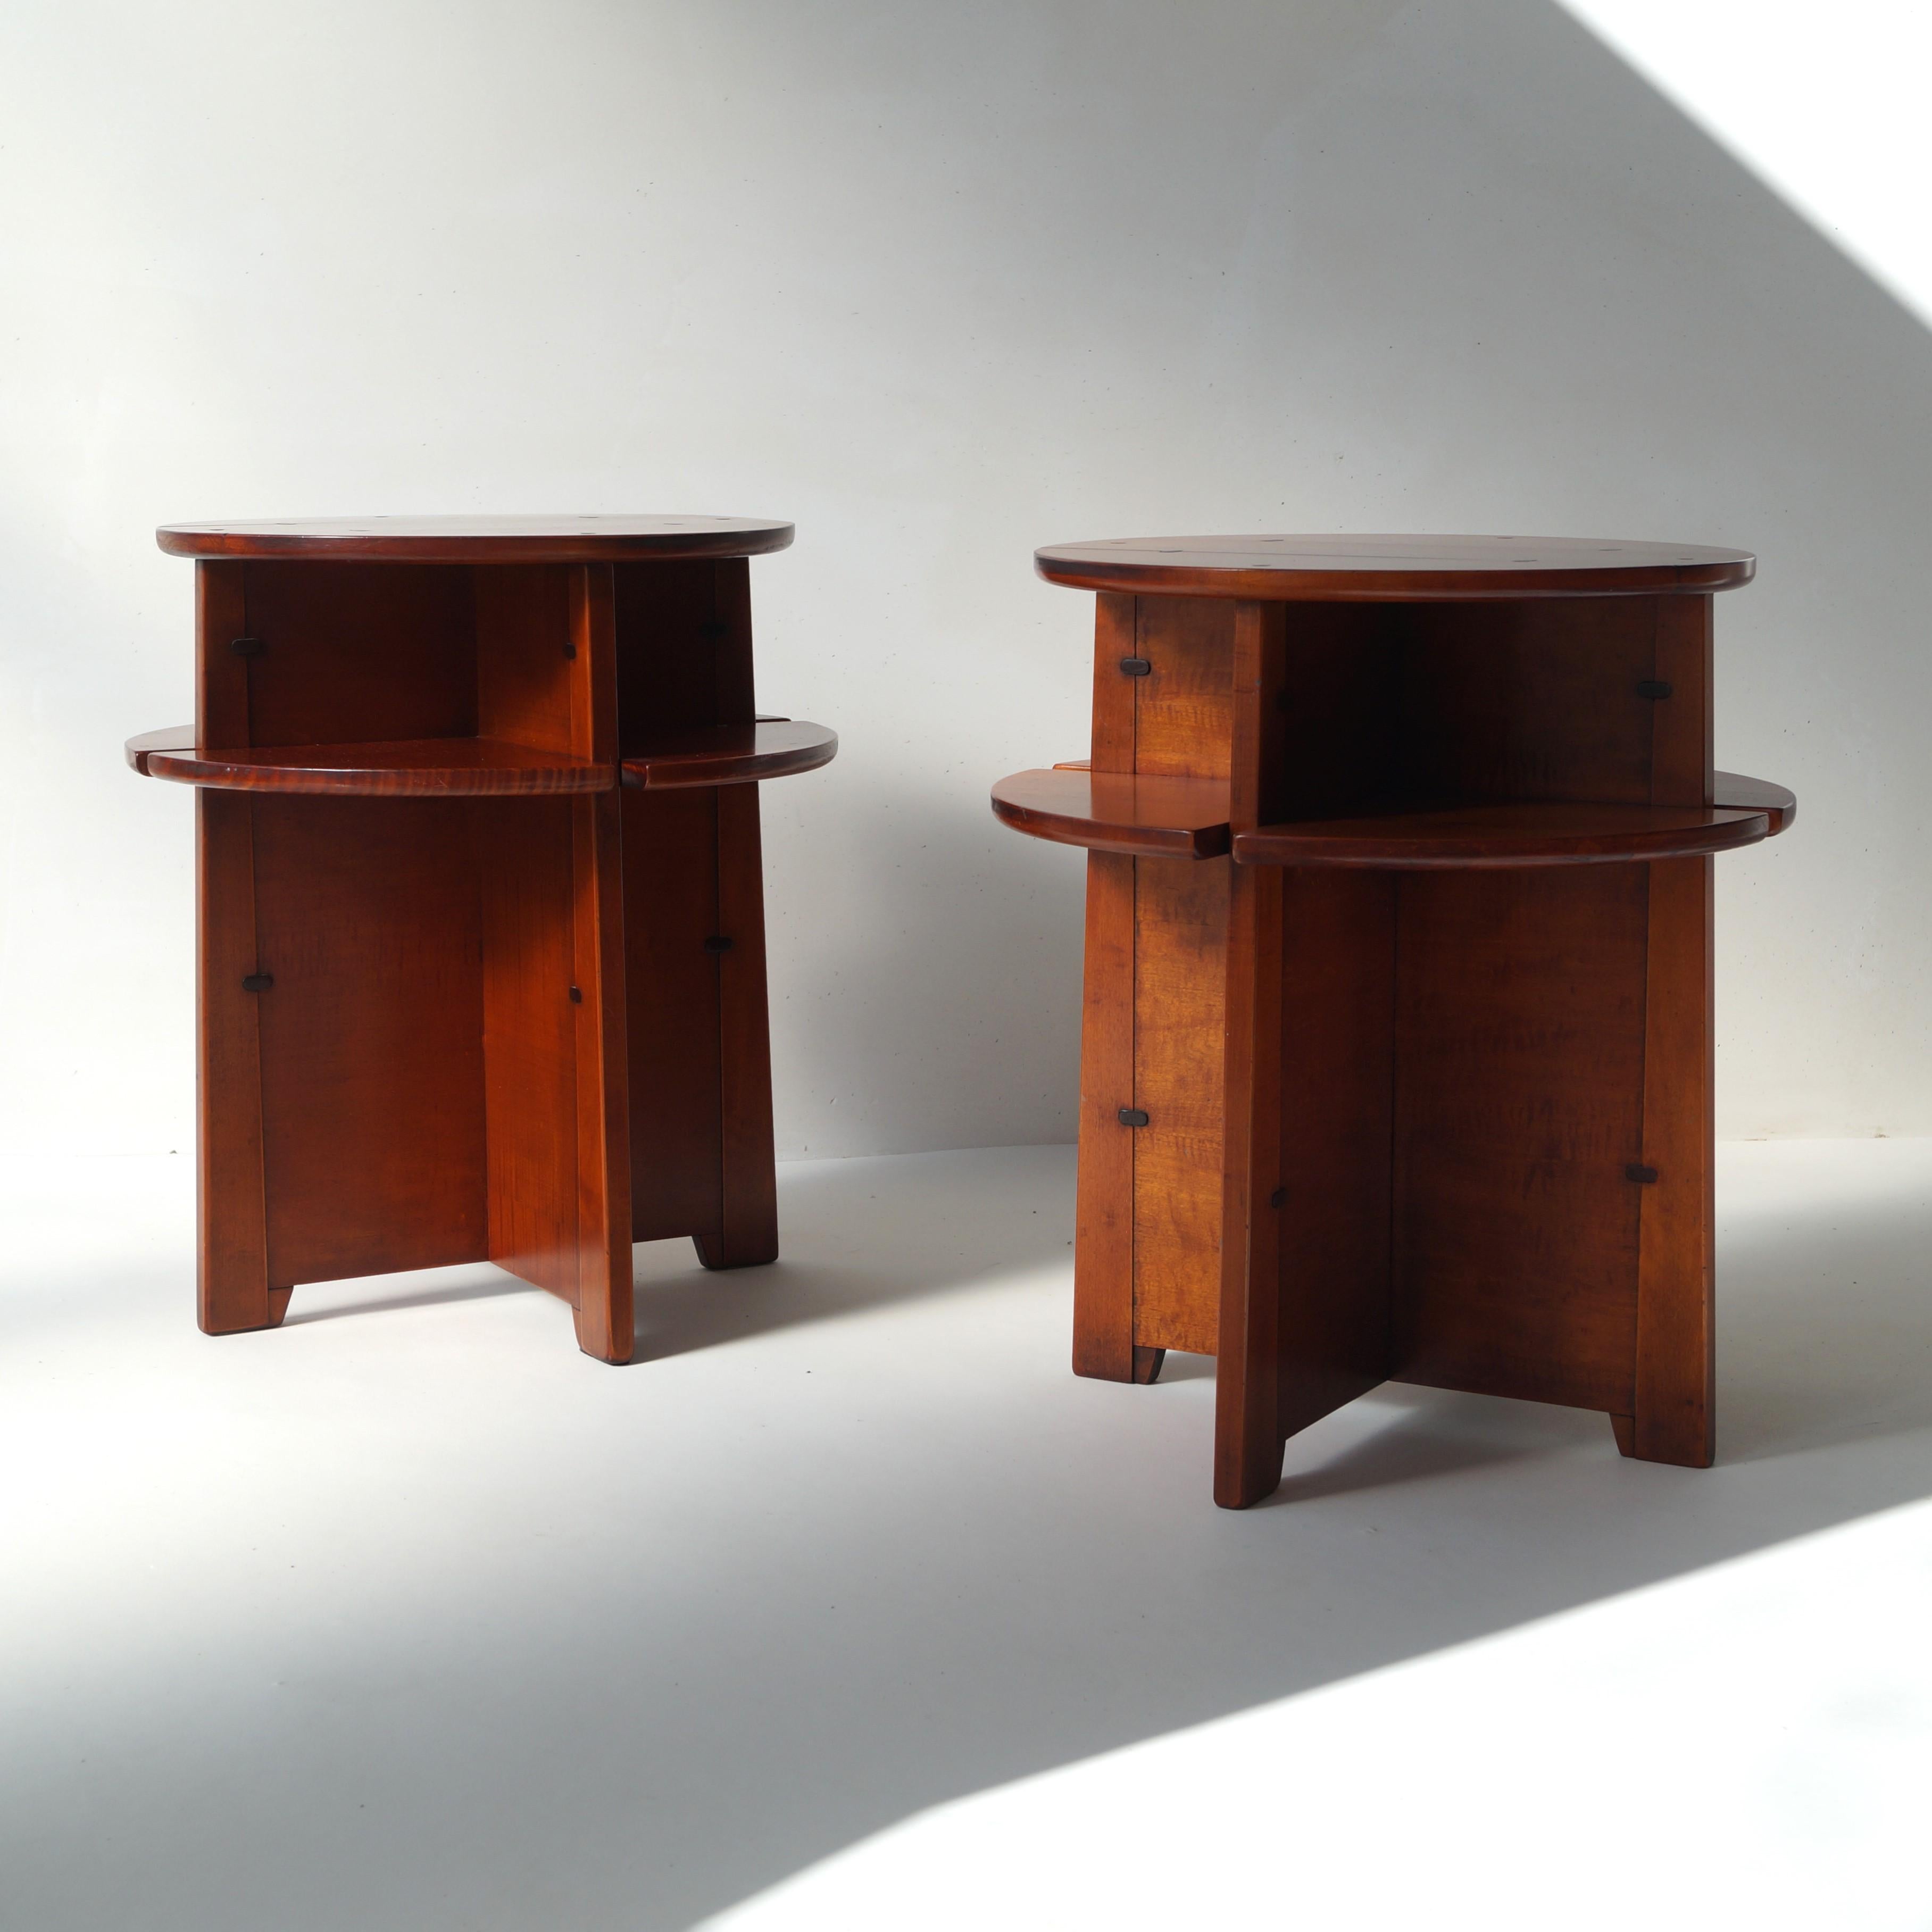 Sold as a set or per item - price is per item. 

A set of two modernist Dutch occasional tables, ca. 1980, in solid cherry wood. Quite an unusual design with the division in shelves and the accents in the joints. 

The furniture manufacturer